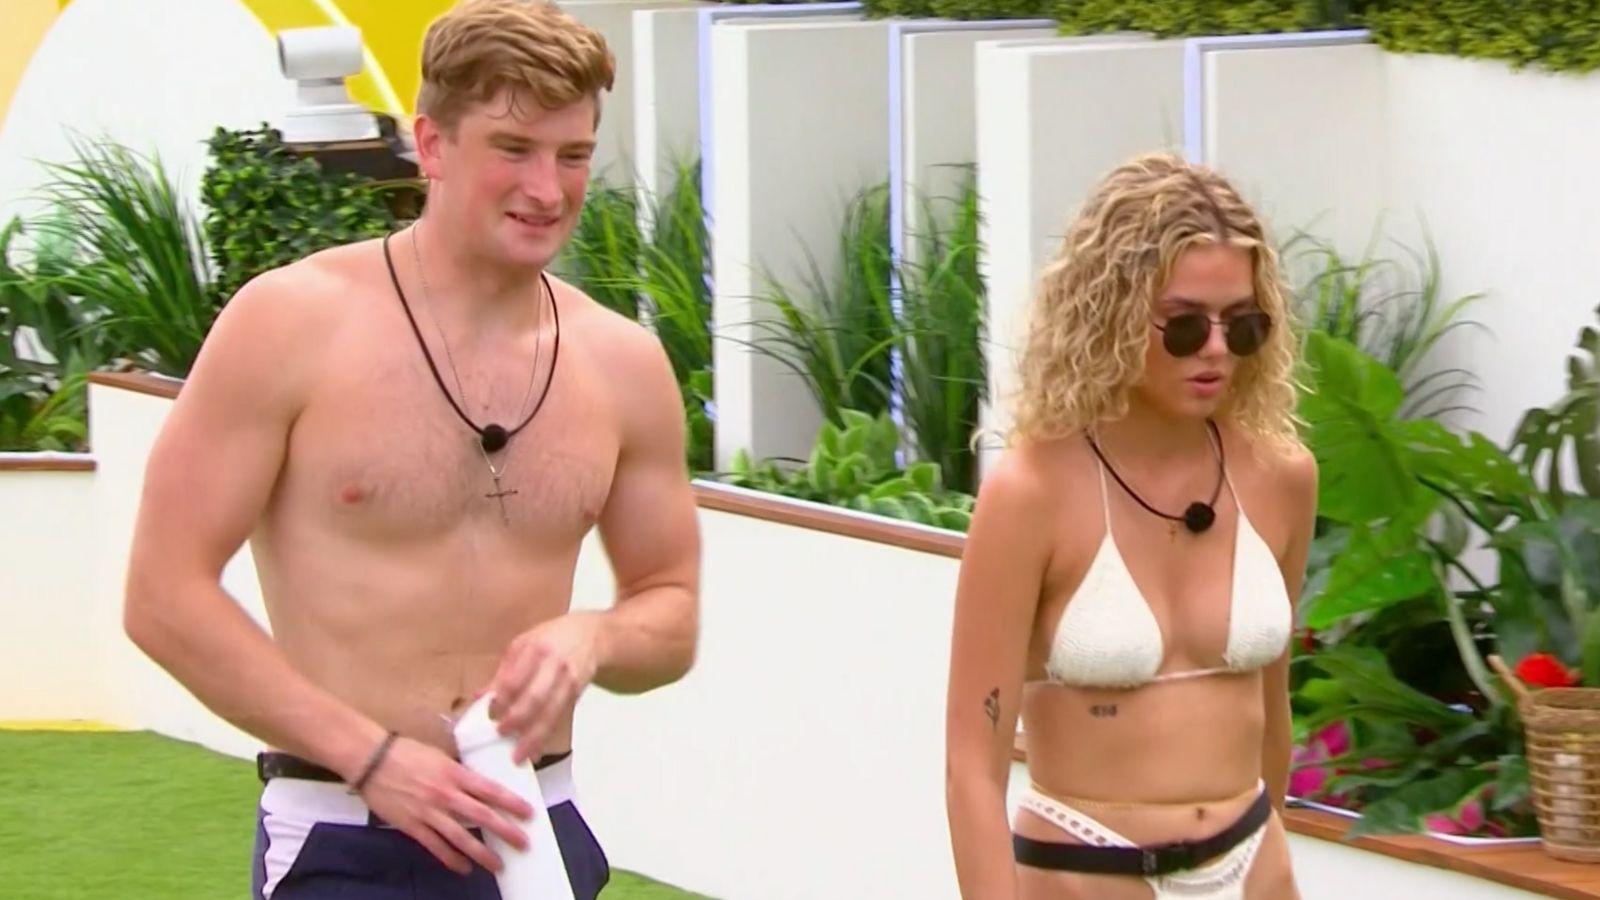 Love Island USA fans are gushing over Bergie’s ‘Lego’ speech to Carmen